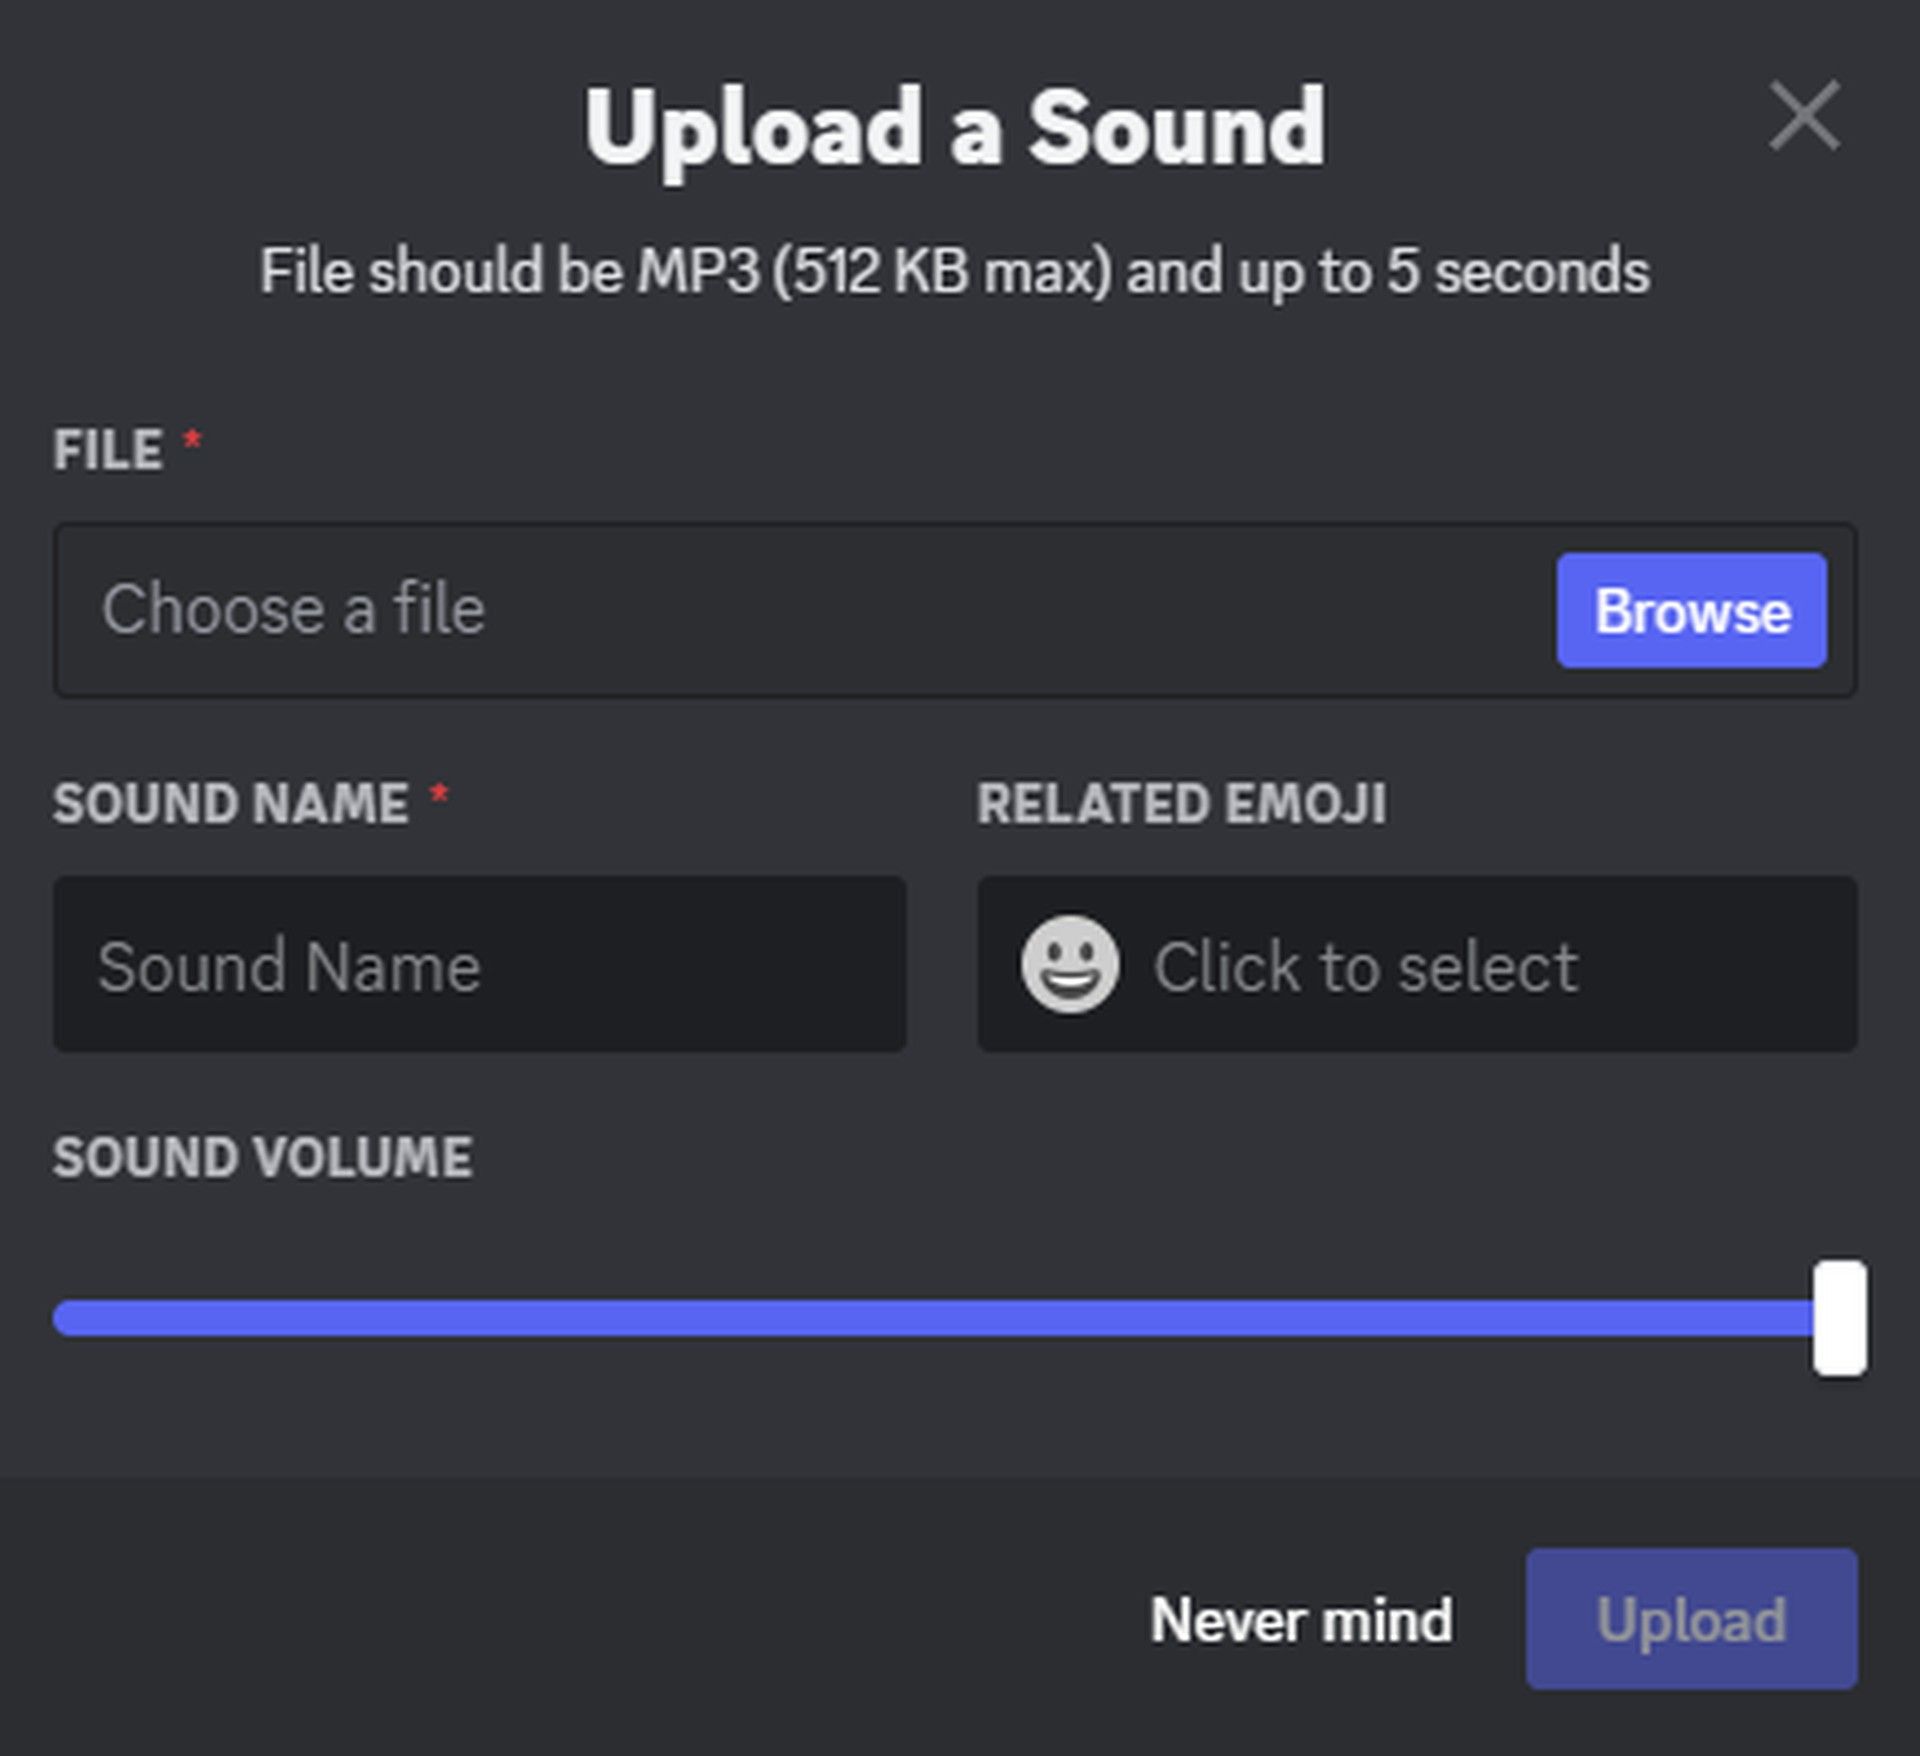 How to use Discord Soundboard